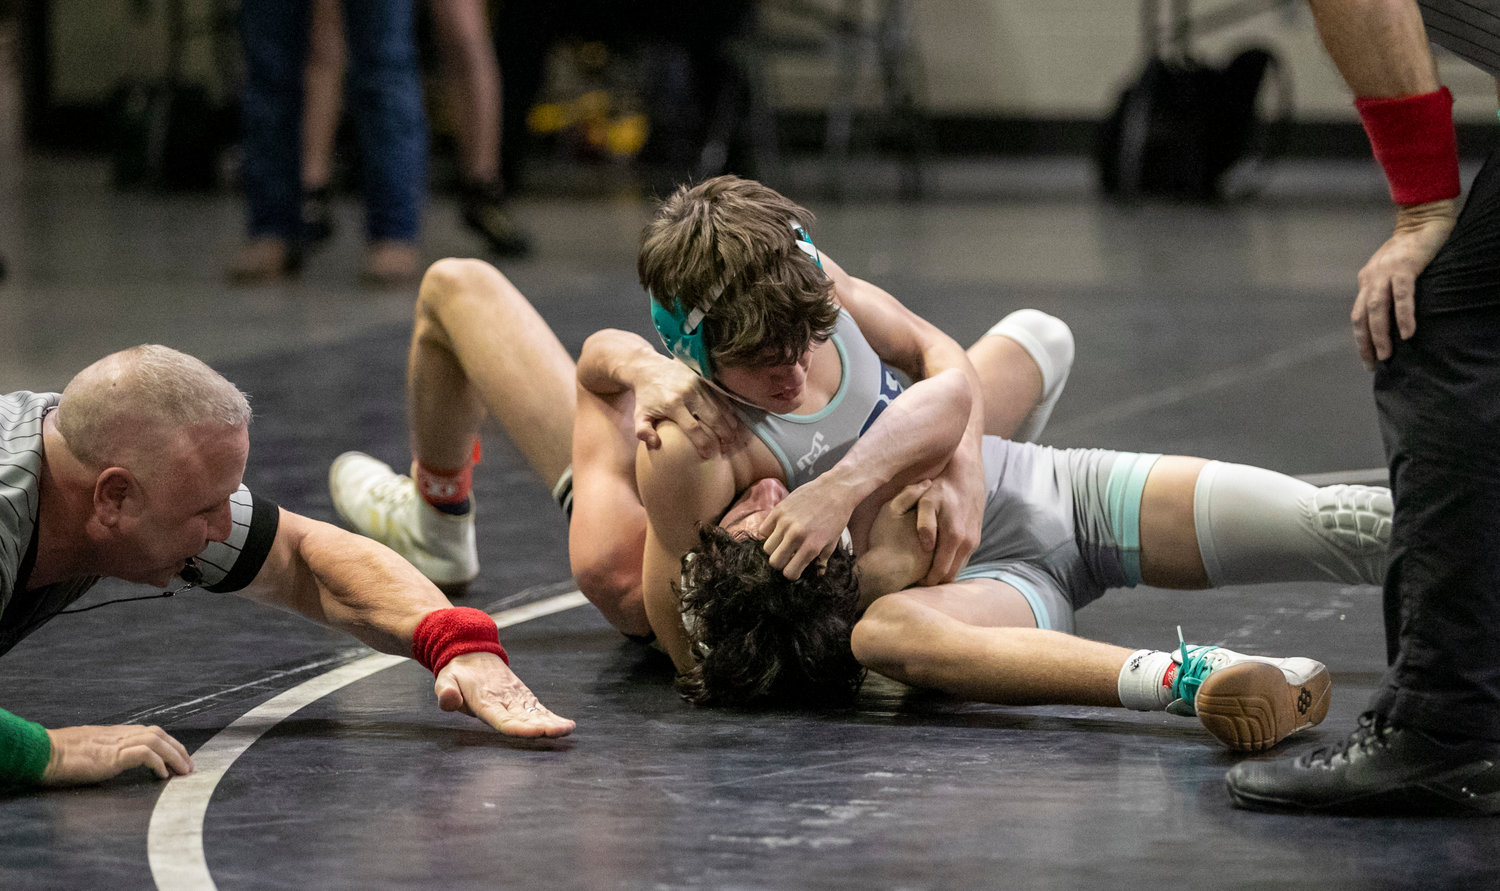 Gulf Shores’ Hayden Cook locks in a pin during the 115-pound match of the Class 5A dual consolation finals at Bill Harris Arena in Birmingham Friday, Jan. 20. Cook’s was one of two pins in the final two matches that helped the Dolphins claim third place in Class 5A with a 37-27 win over Hayden.